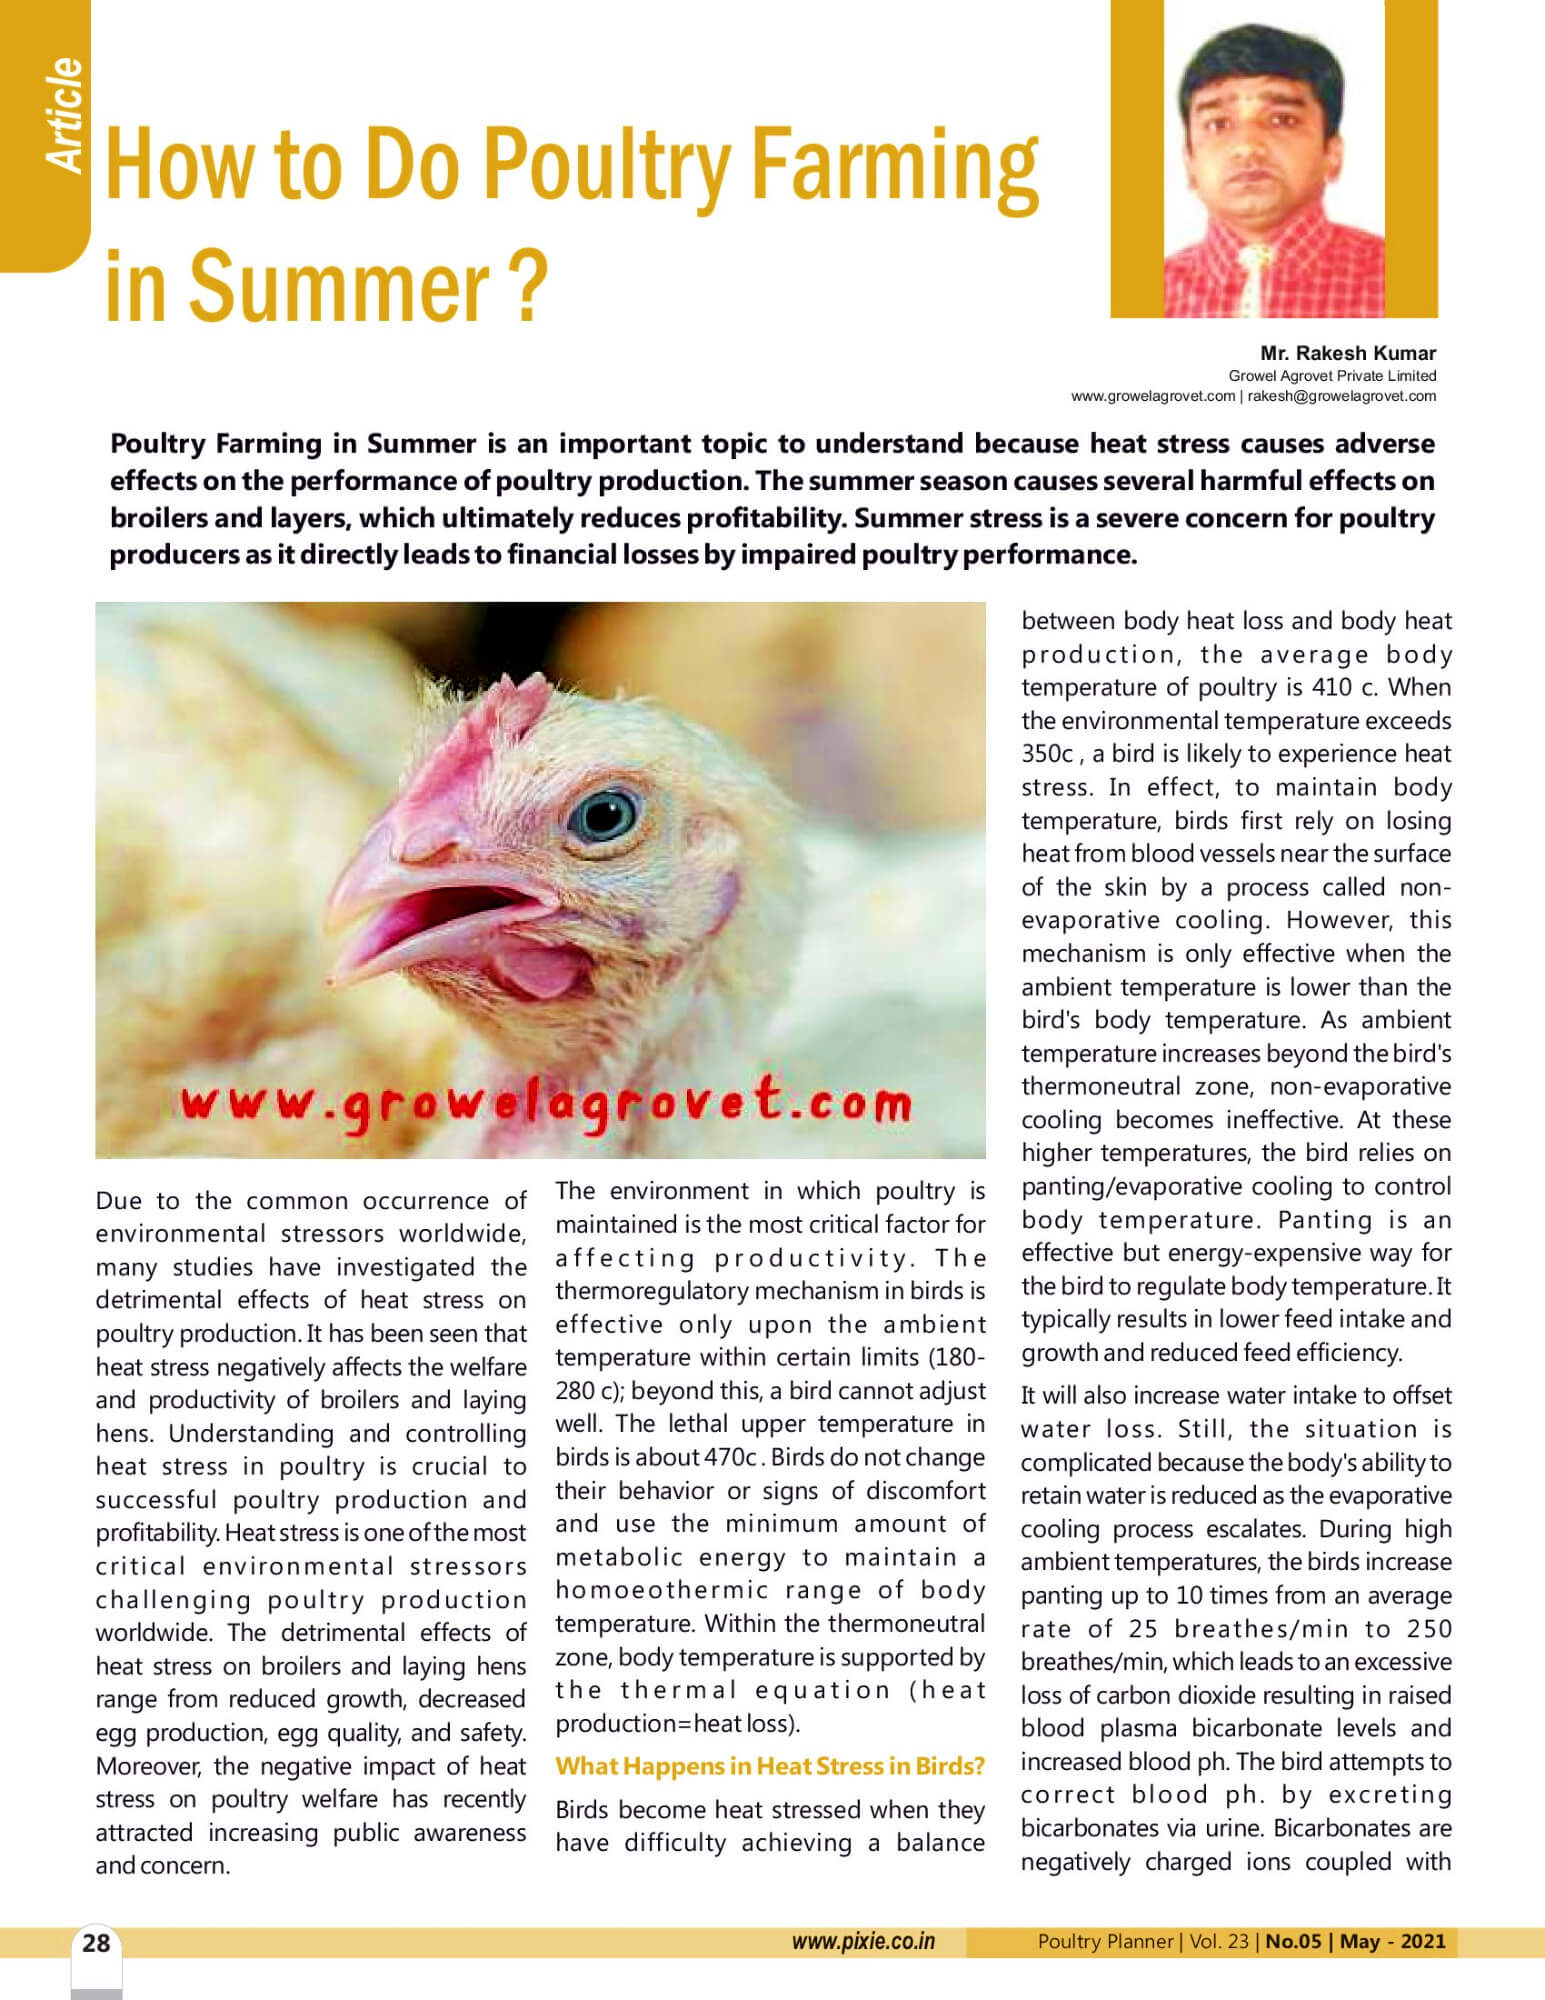 “Poultry Farming in Summer “article